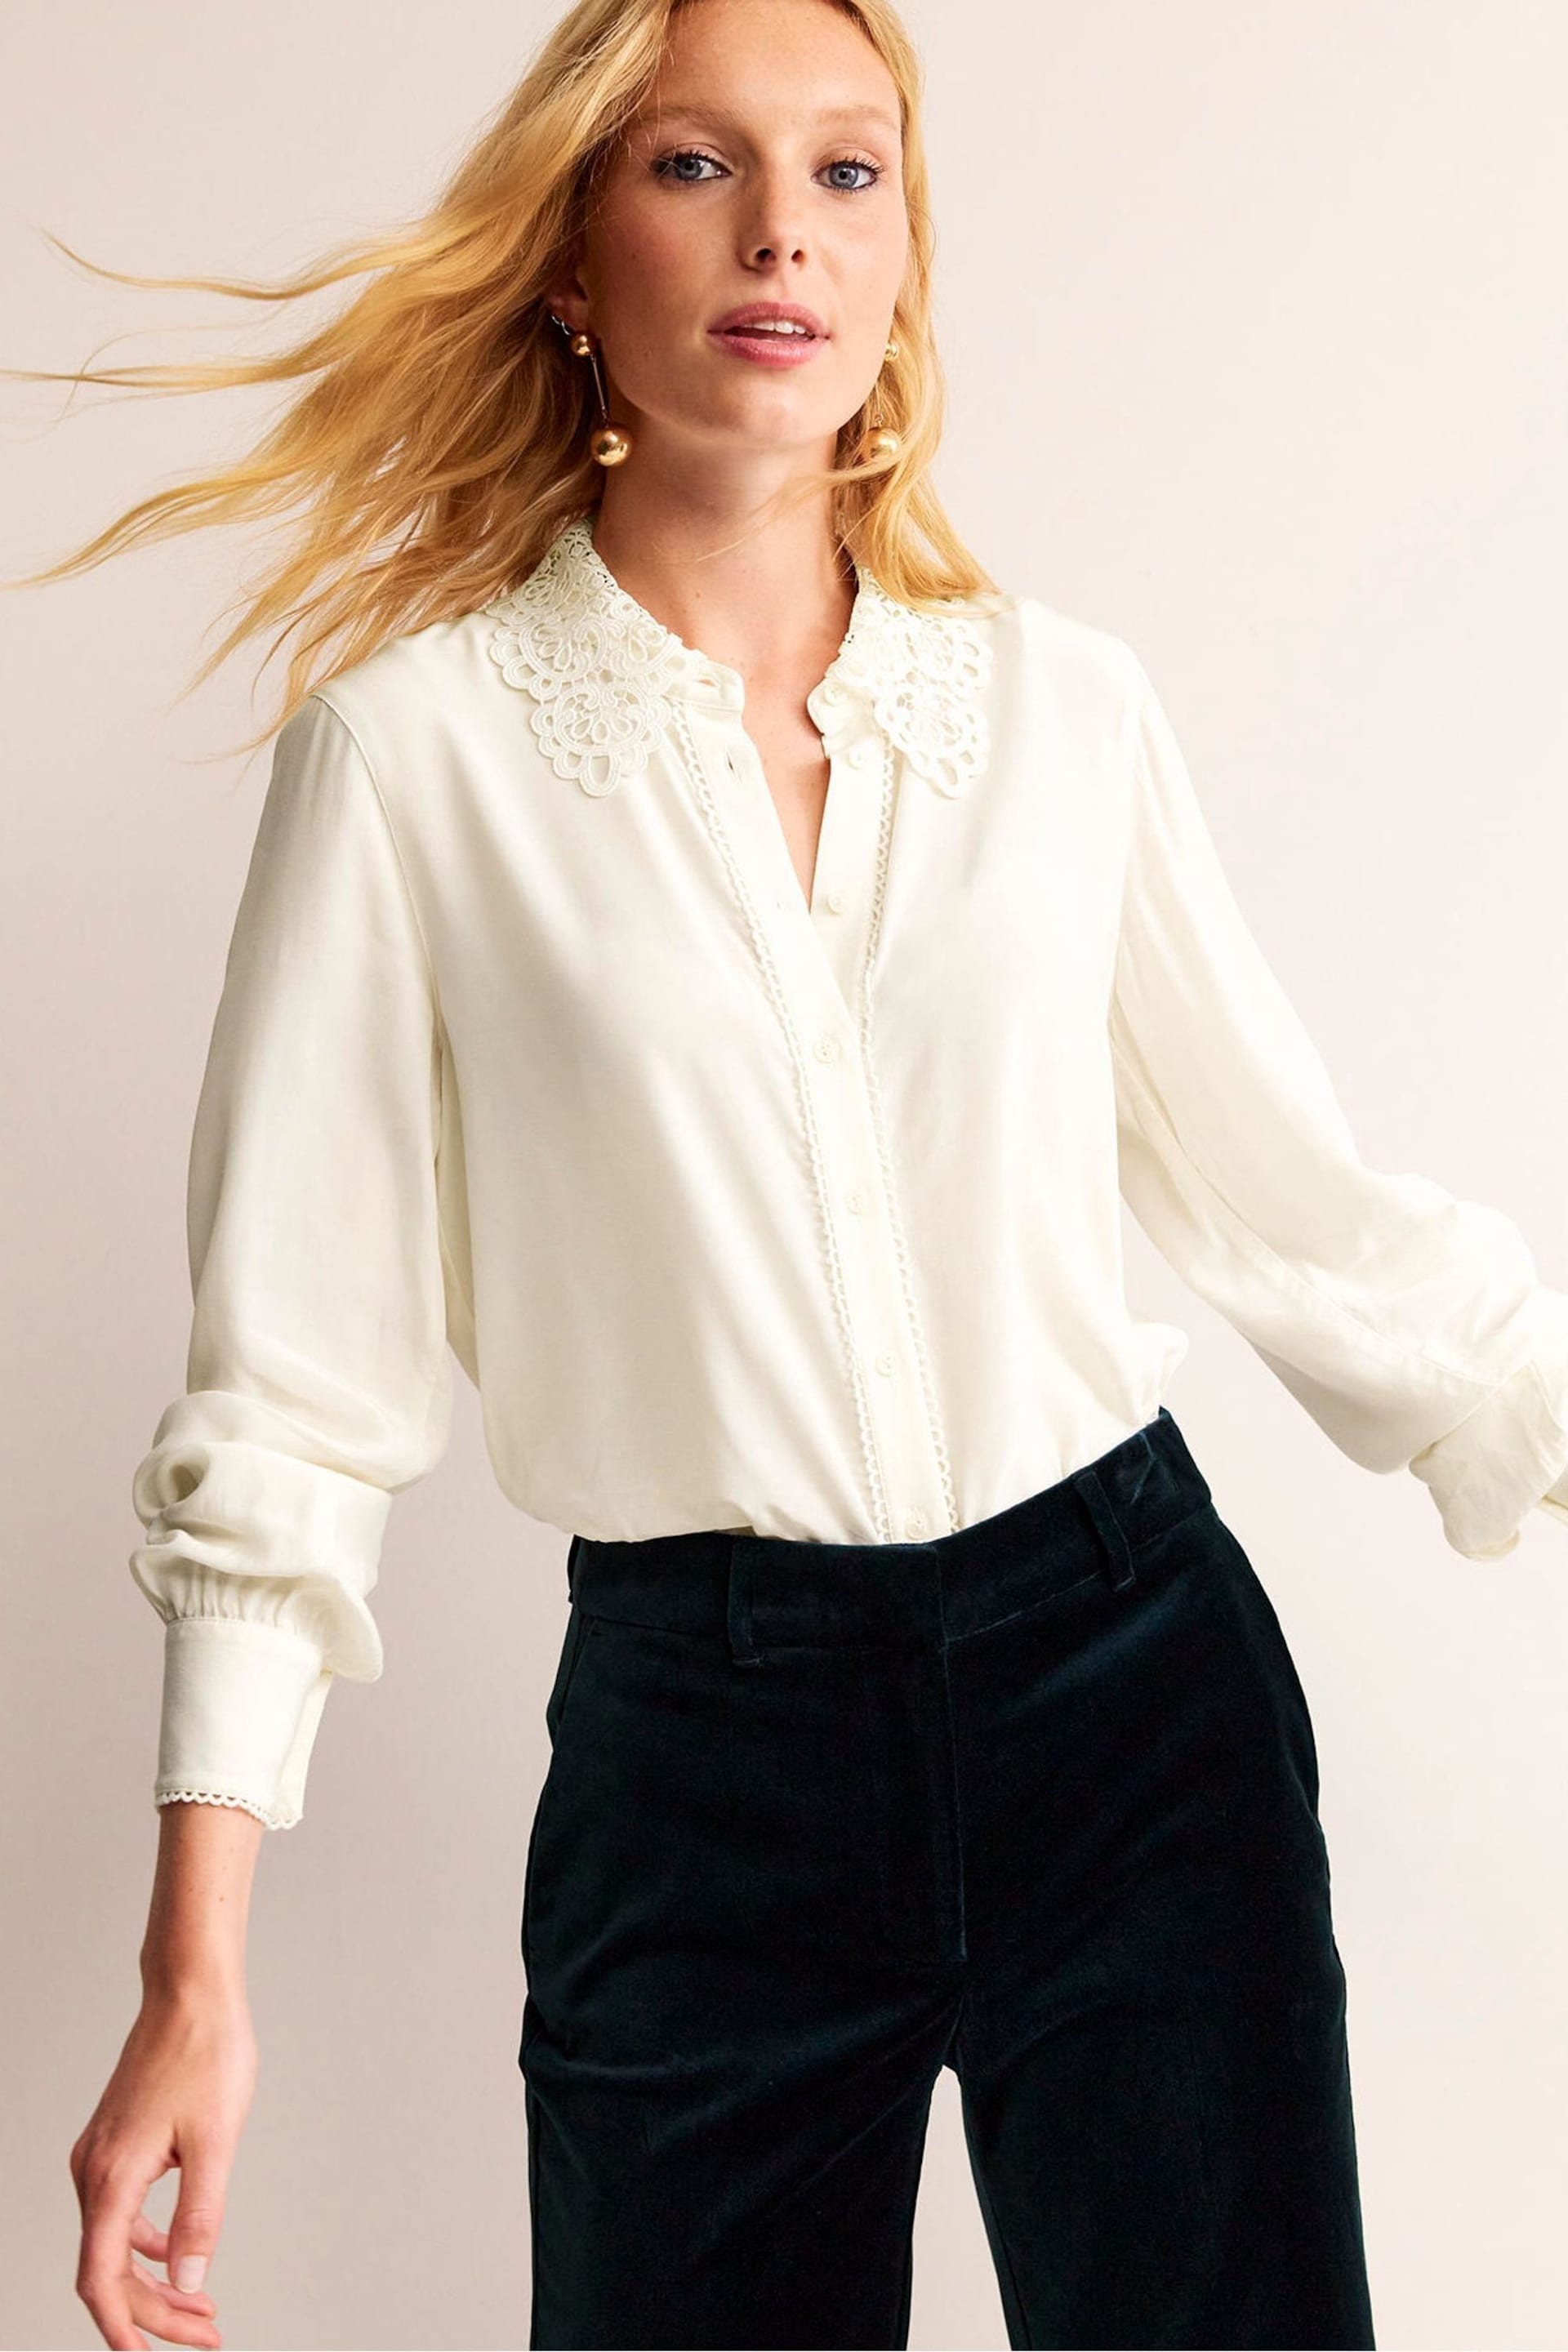 Boden Cream Lace Collar Shirt - Image 1 of 5